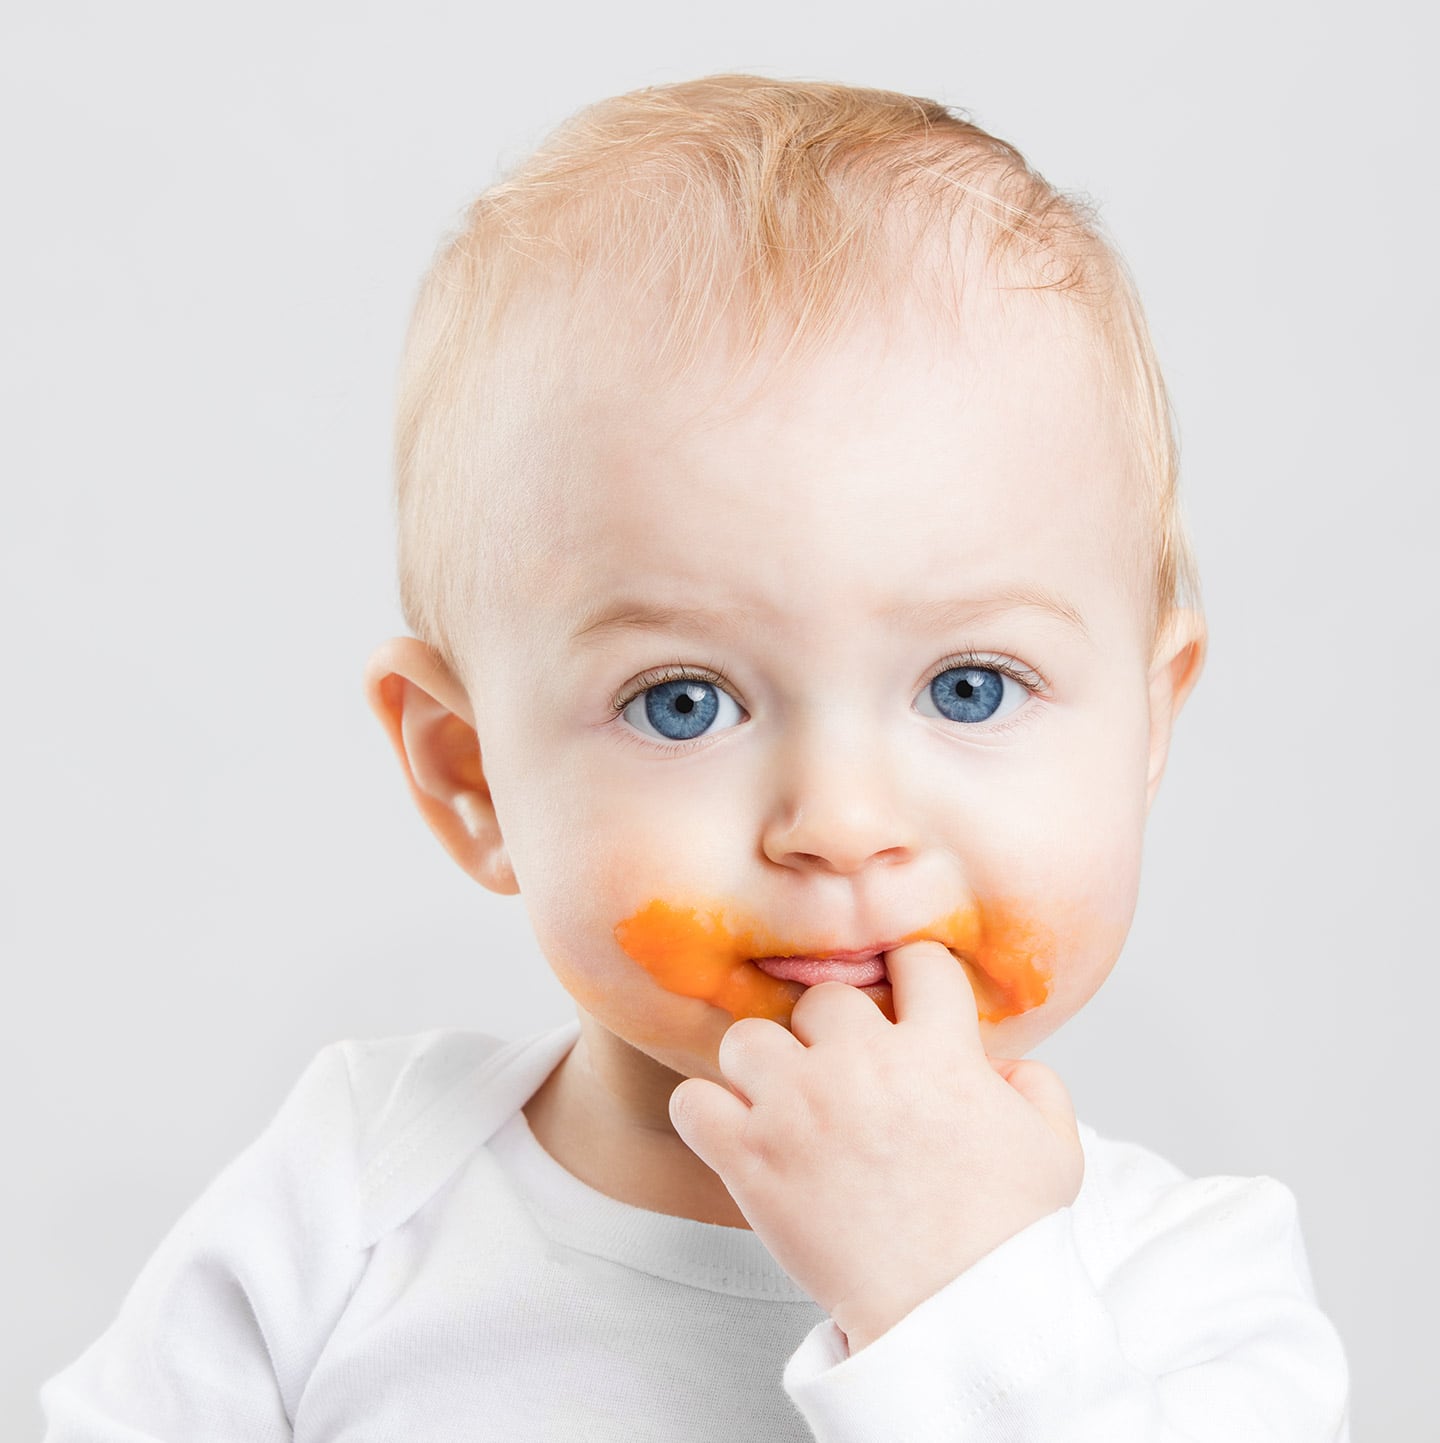 Baby with big blue eyes and carrot puree around his mouth